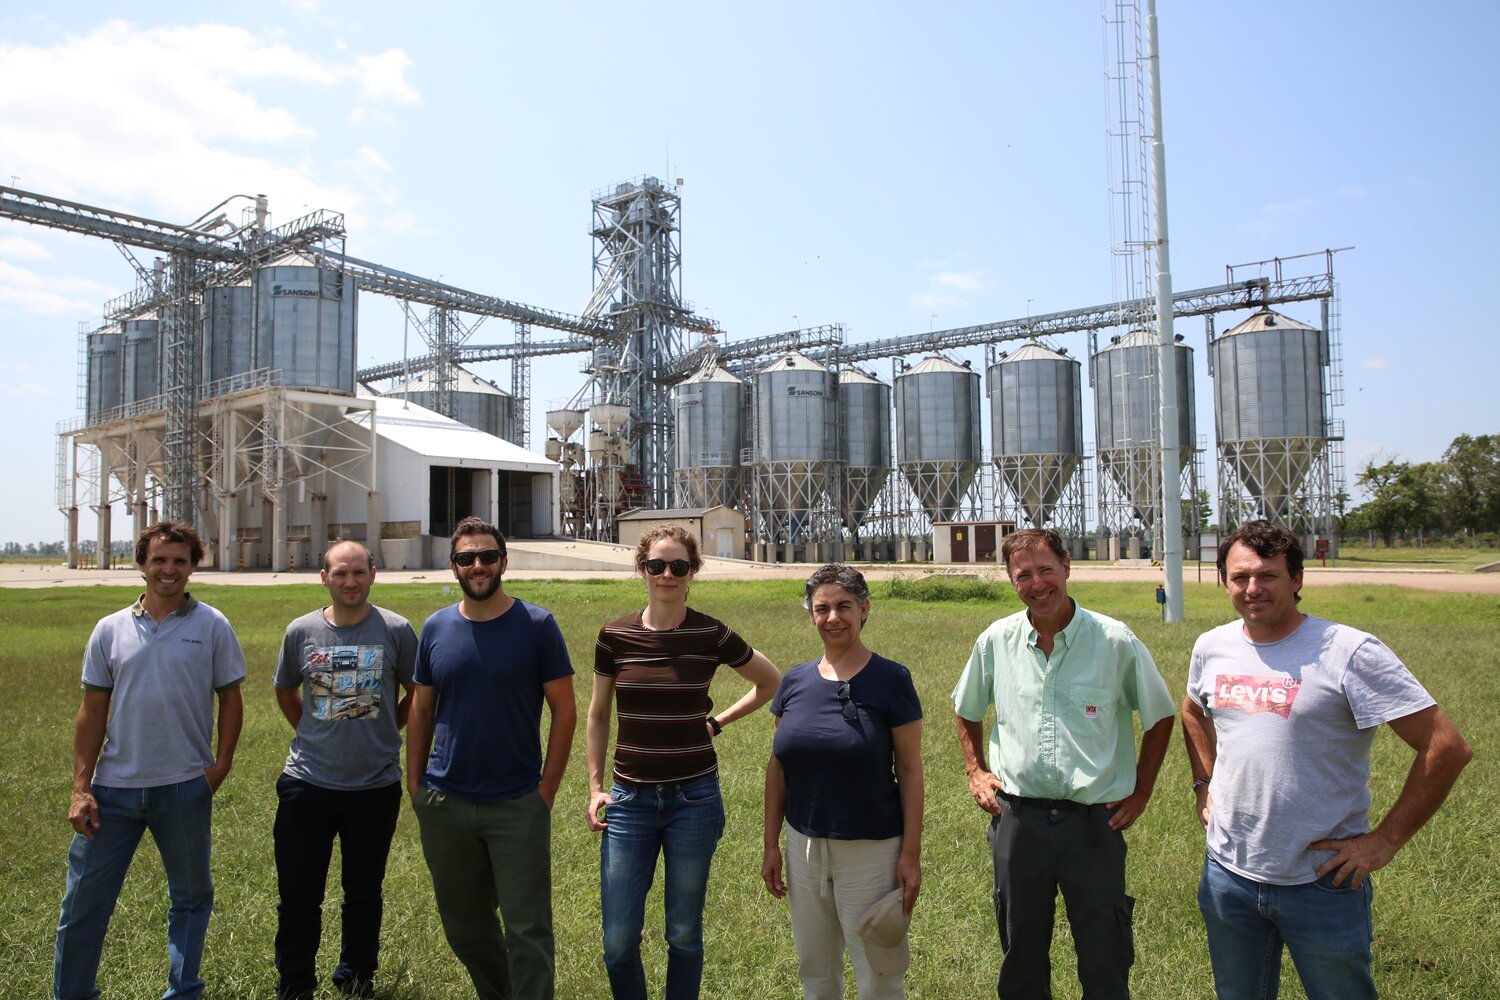 Day 5: Our Crop Wild Relatives pre-breeding partners INTA take us to Girasoles del Plata, an agribusiness located in Pehuajó, Buenos Aires Province. Roberto Carrera, Logistics and Process Manager (far left) gave us a detailed tour of their plant. Girasoles del Plata exports 90% of their products to all corners of the world, to bread-making and pastry industries. As Marcelo Verdinelli, Agricultural Liaison for Adecoagro Sur (far right) told us, they demand top quality, large seeds. For this, they work closely with confectionary sunflower producers.